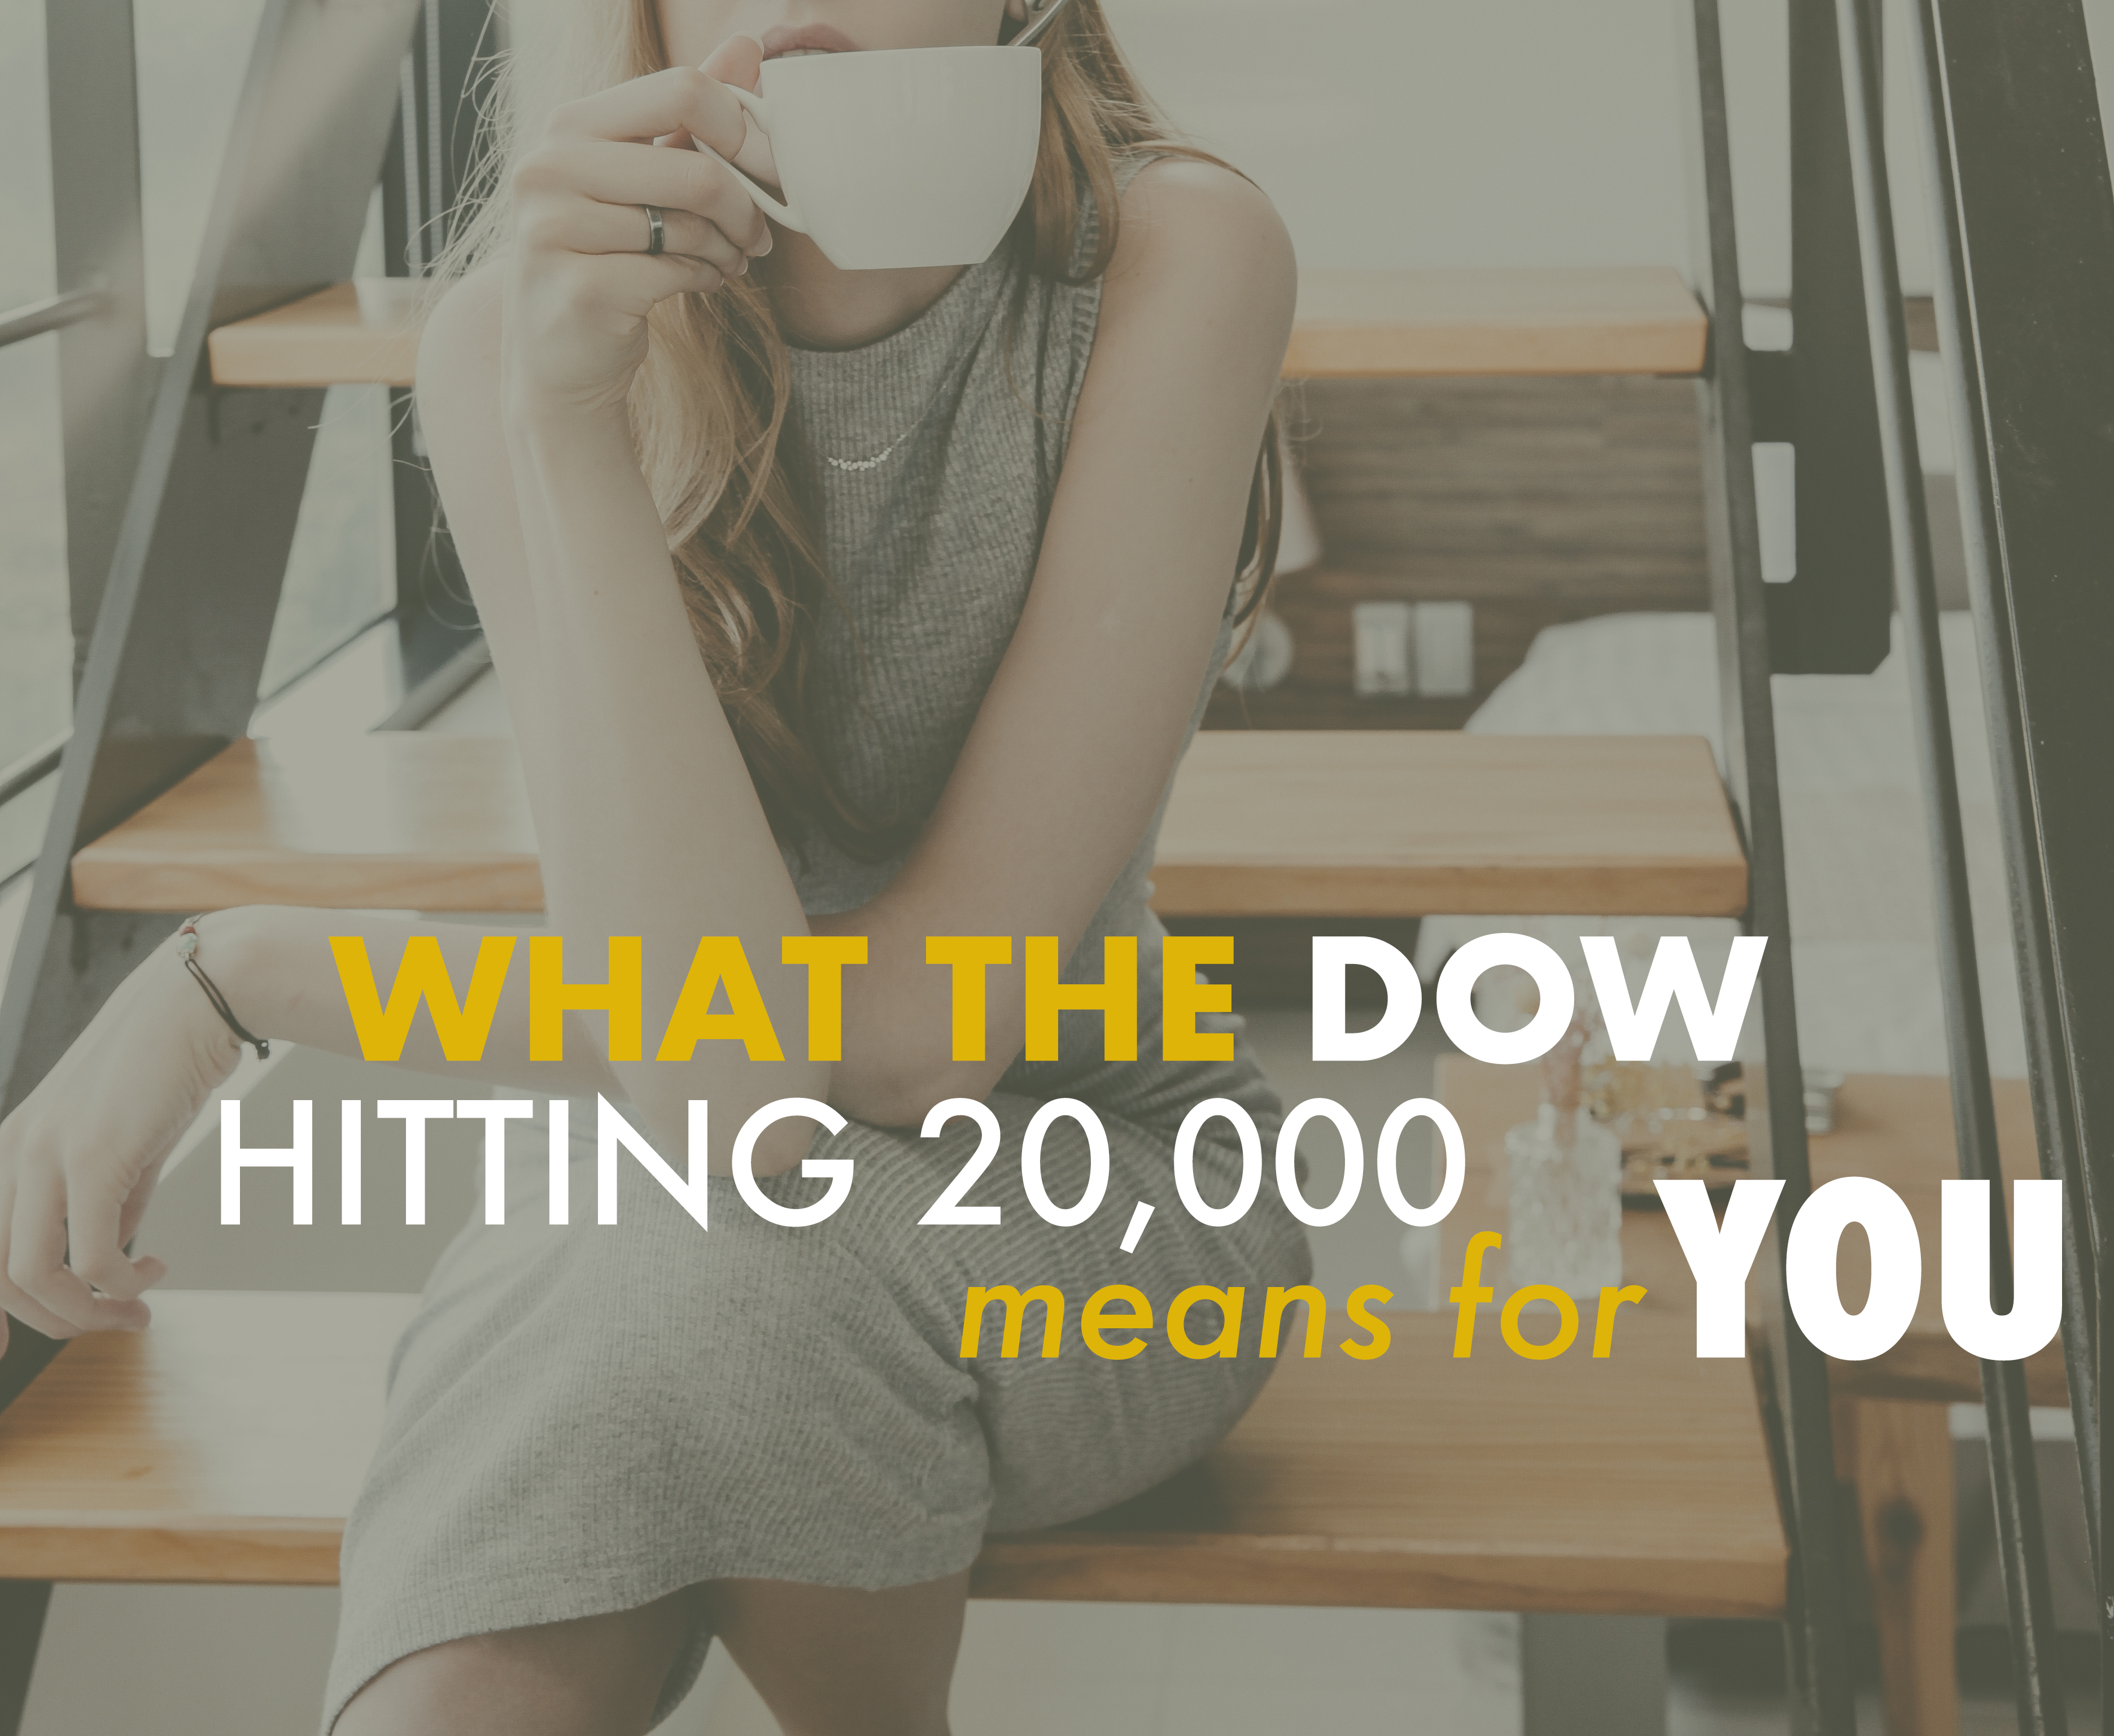 What the Dow Hitting 20,000 Means For You